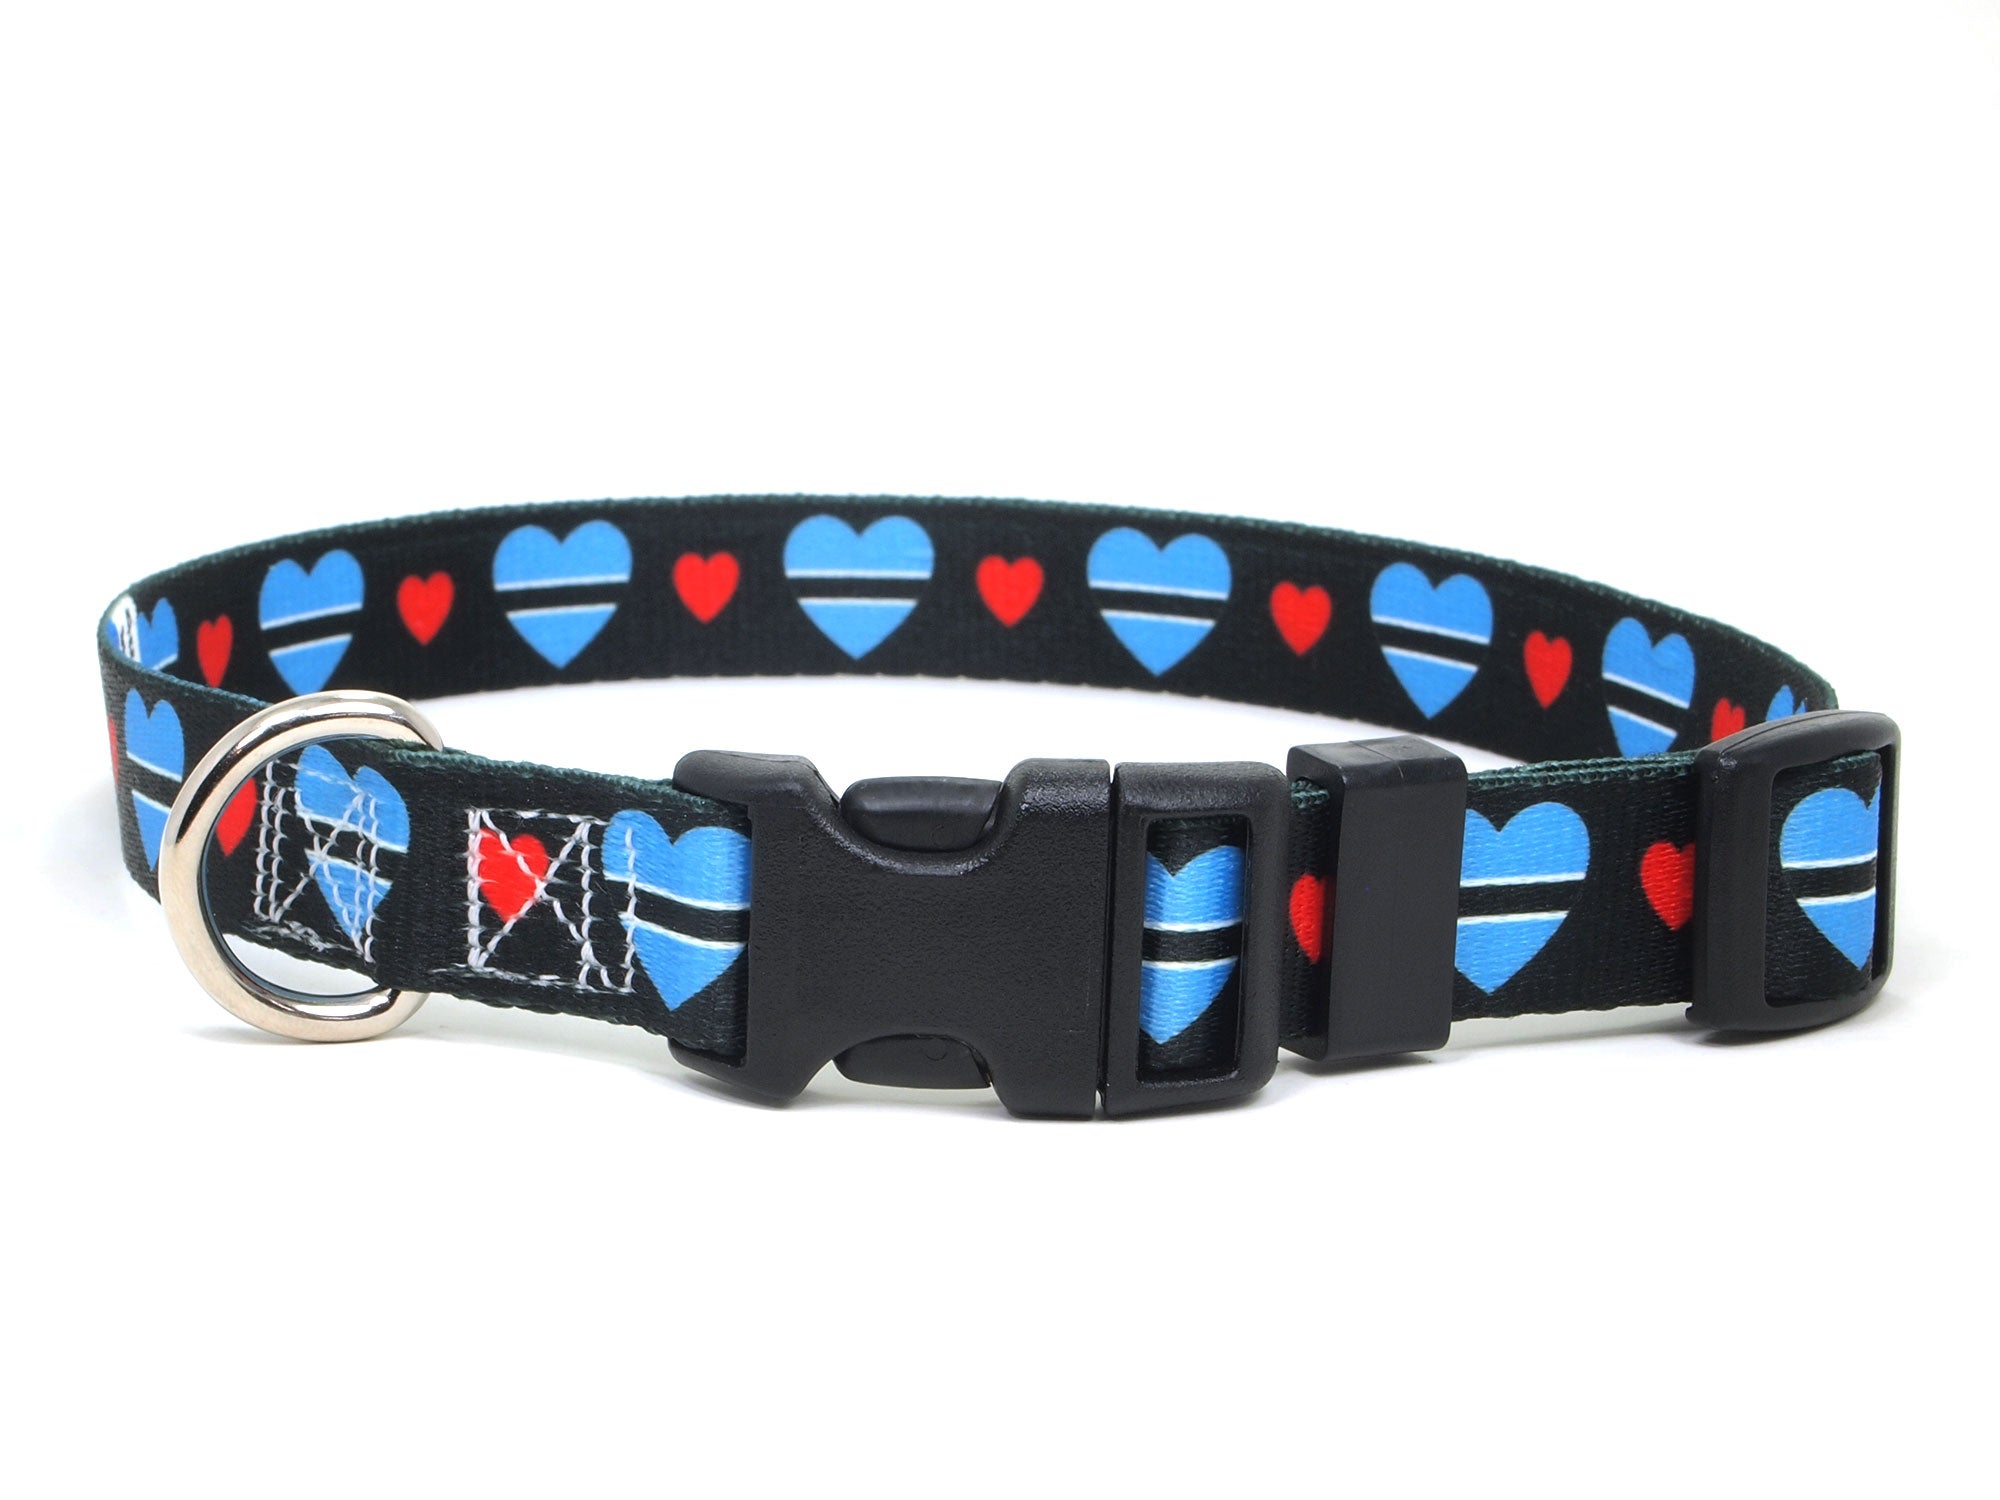 Dog Collar with Botswana Hearts Pattern in black